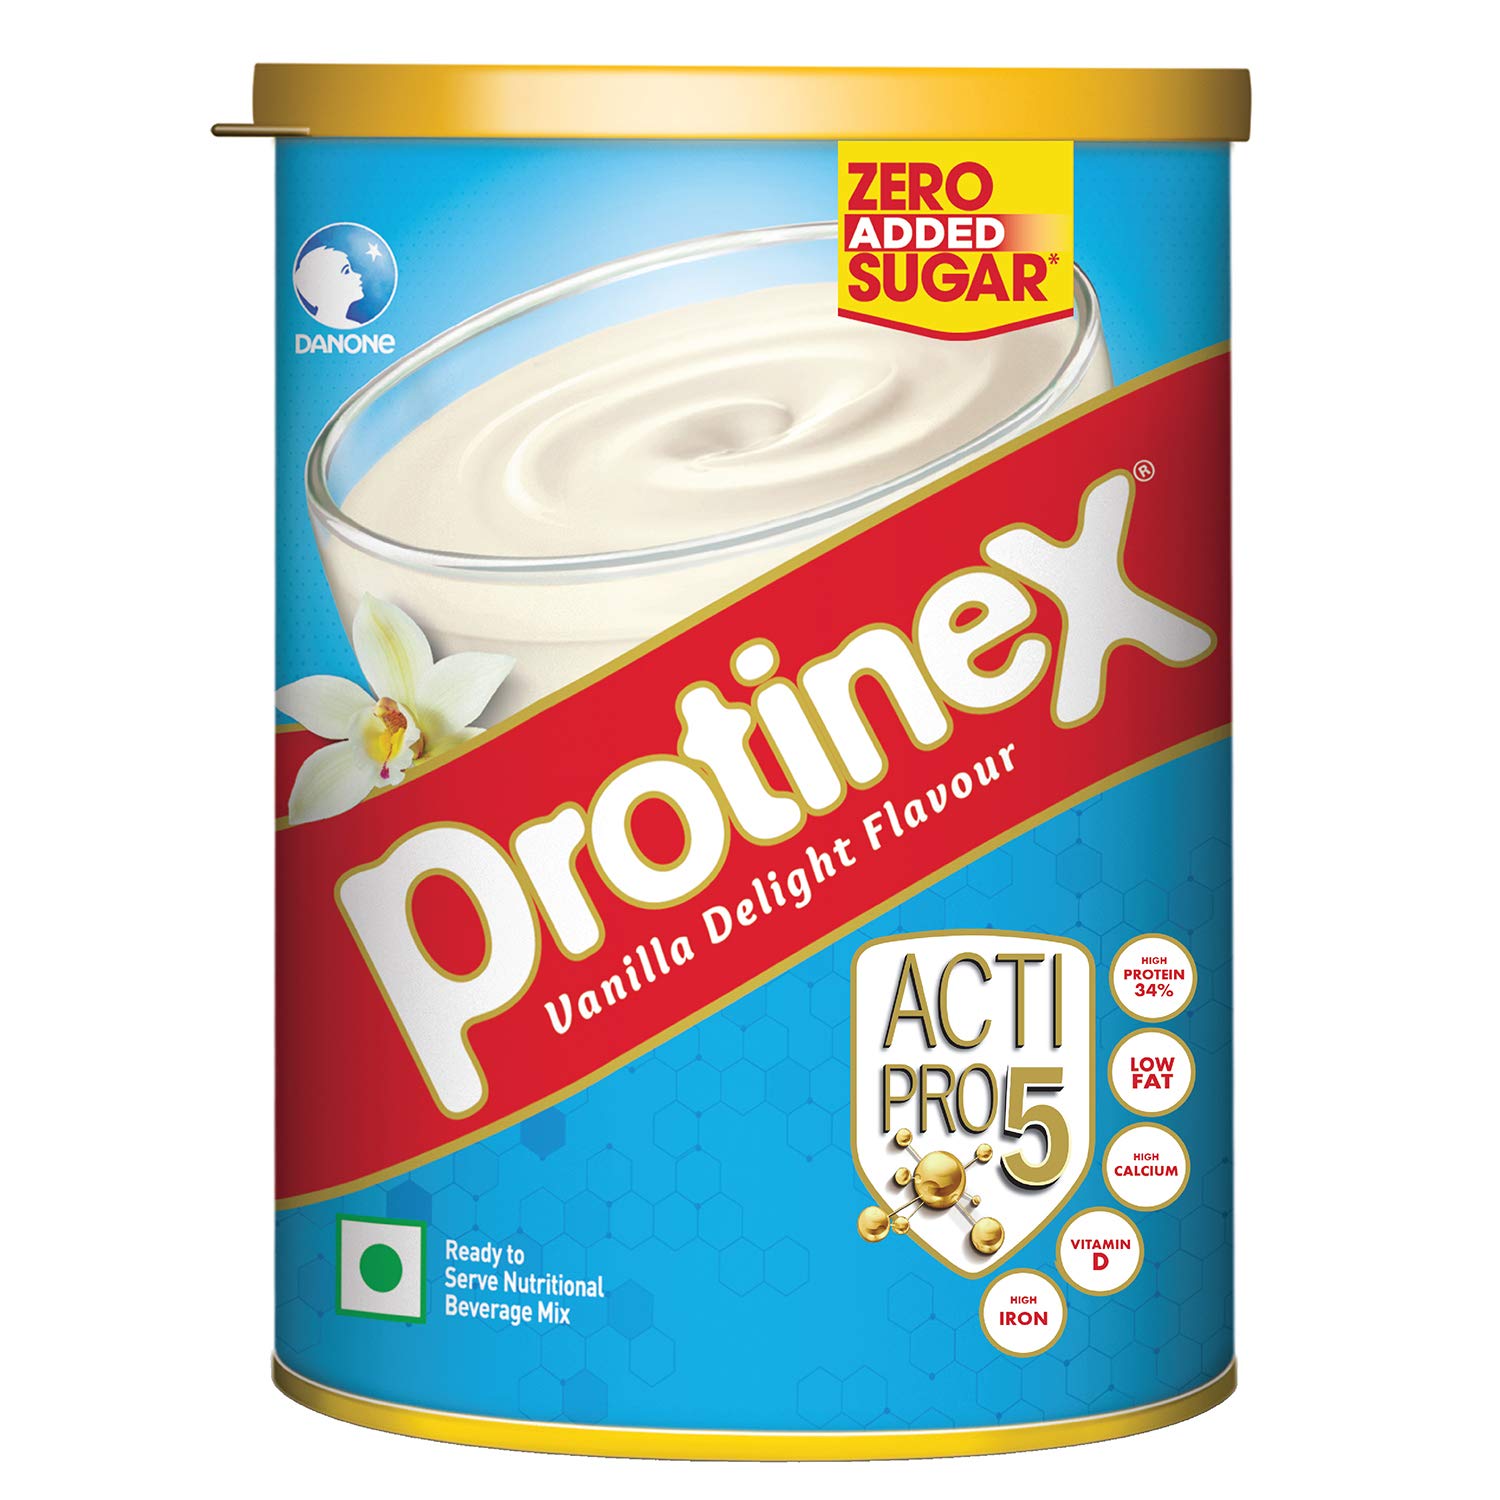 Protinex Health And Nutritional Drink Mix For Adults with High protein & 10 Immuno Nutrients, Vanilla Delight, 400g